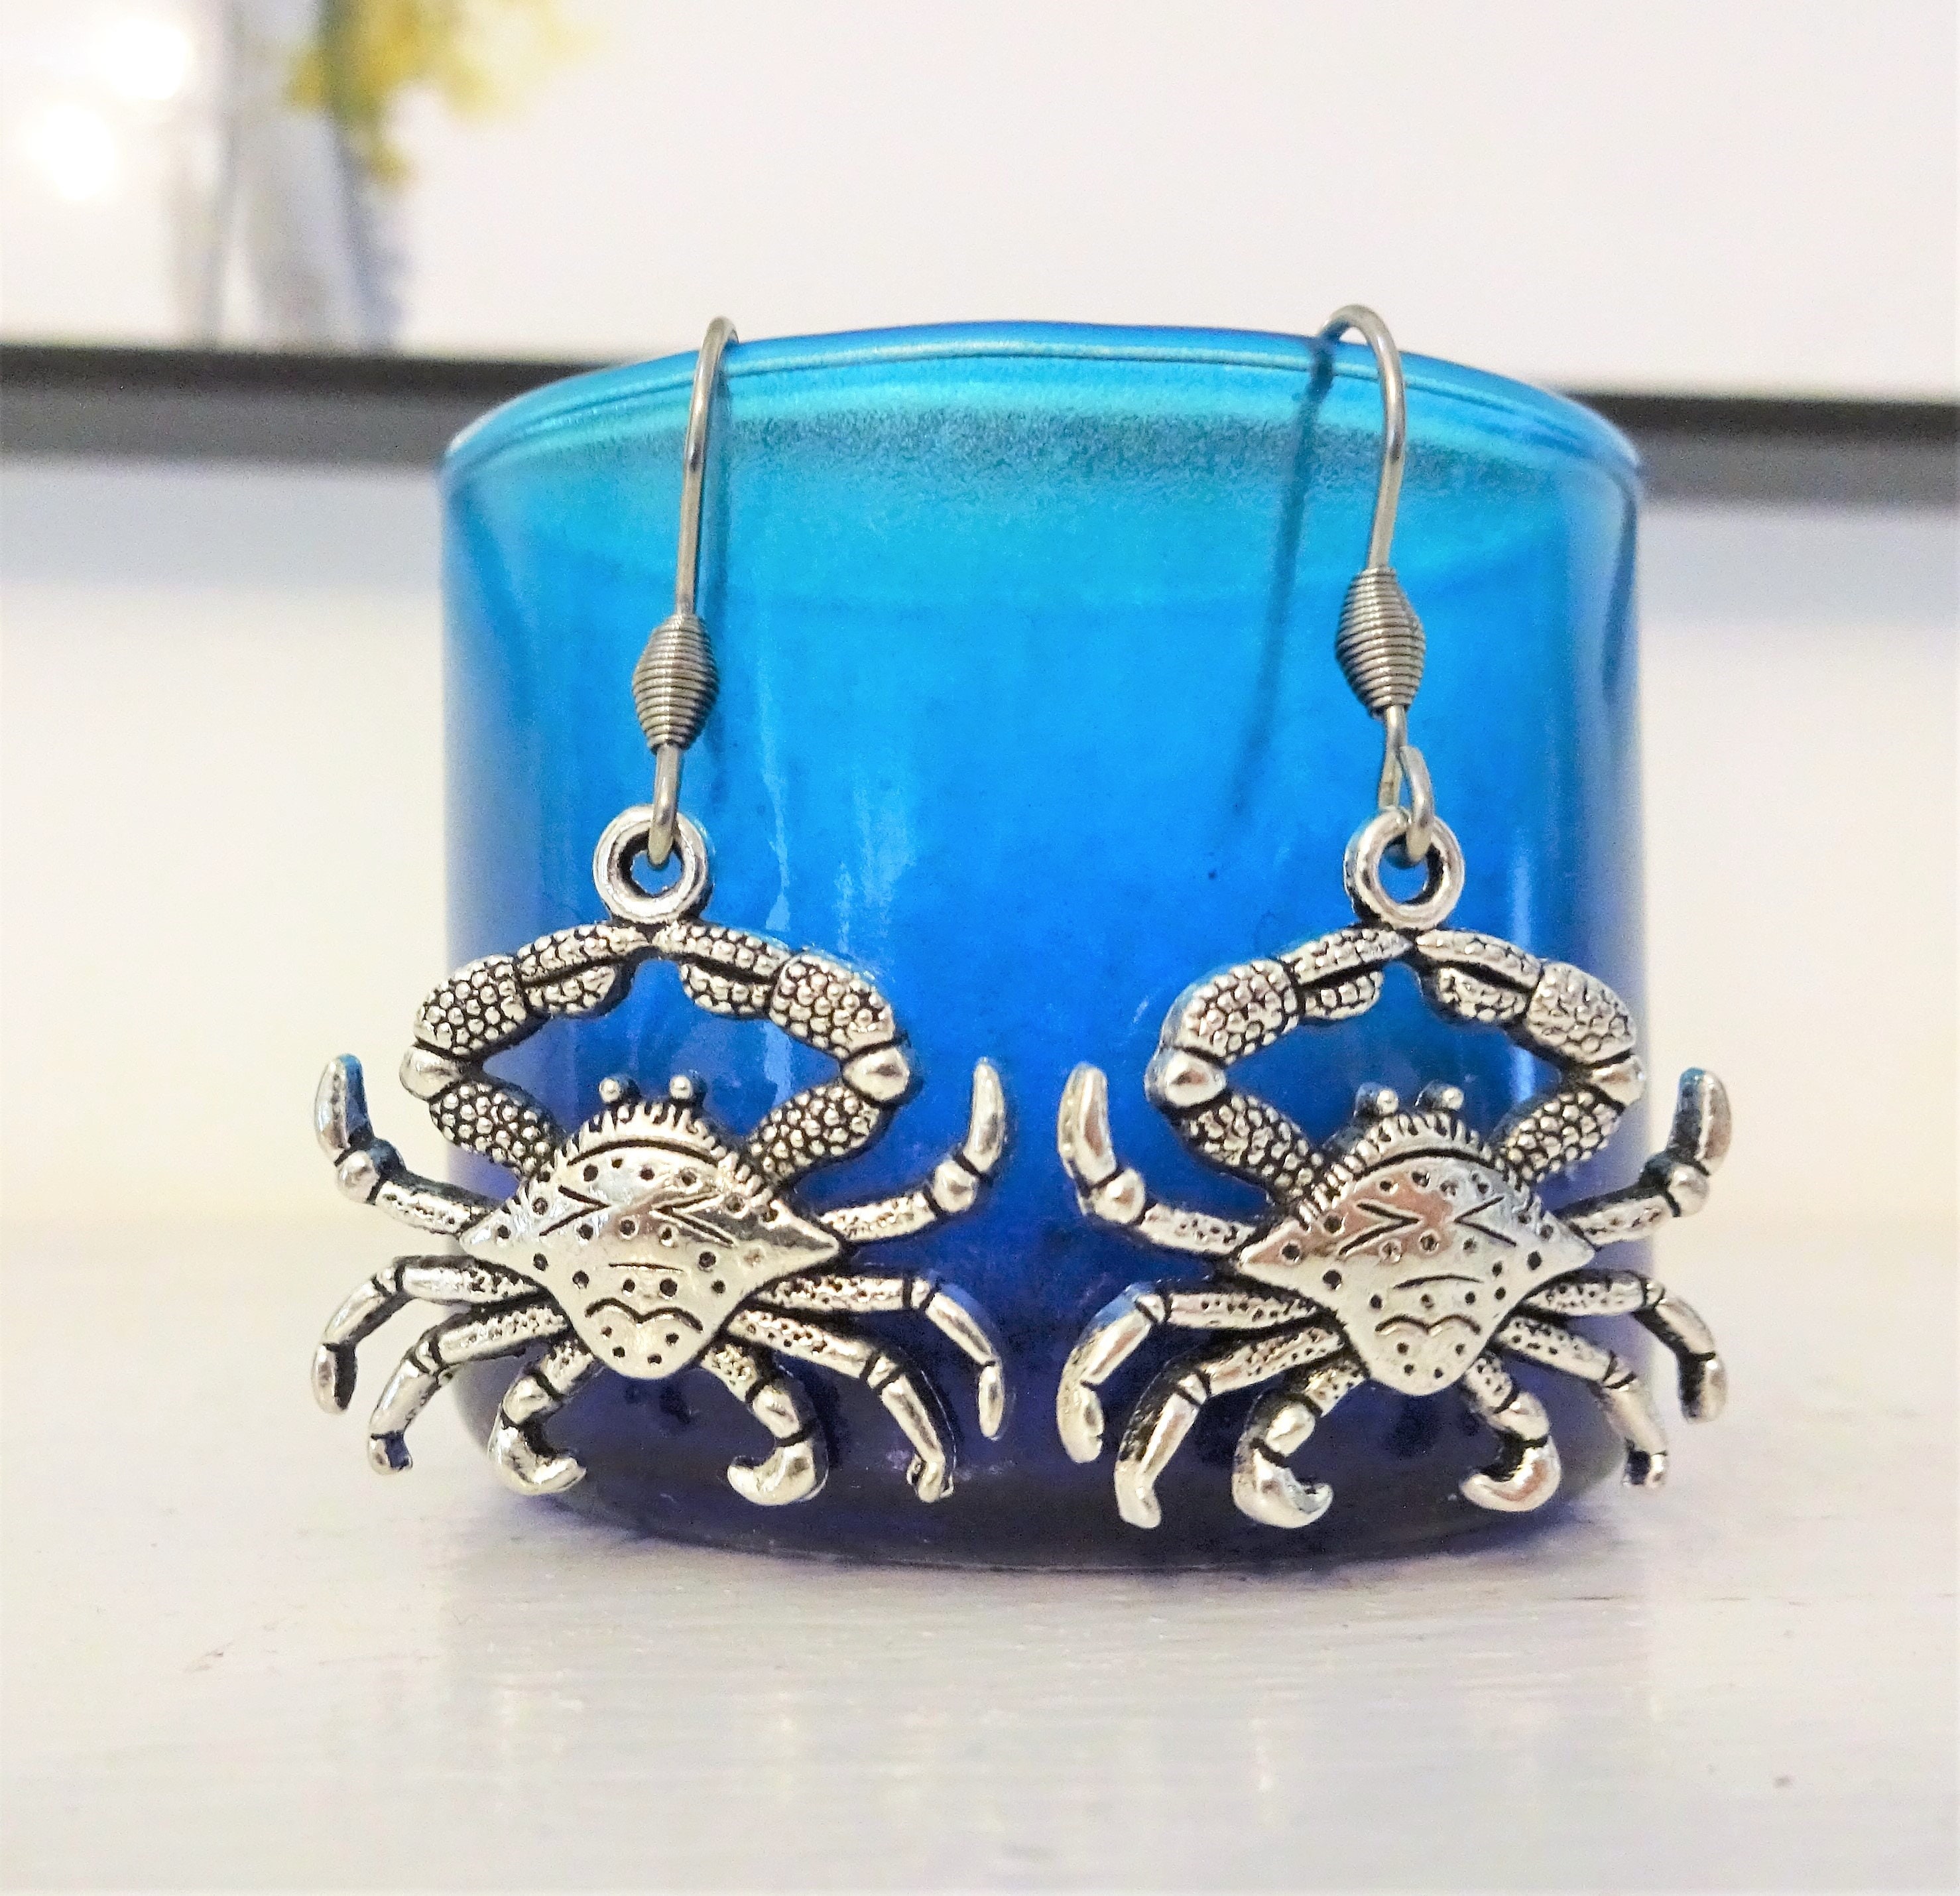 LARGE CRAB EARRINGS on Stainless Steel Ear Hooks or Posts